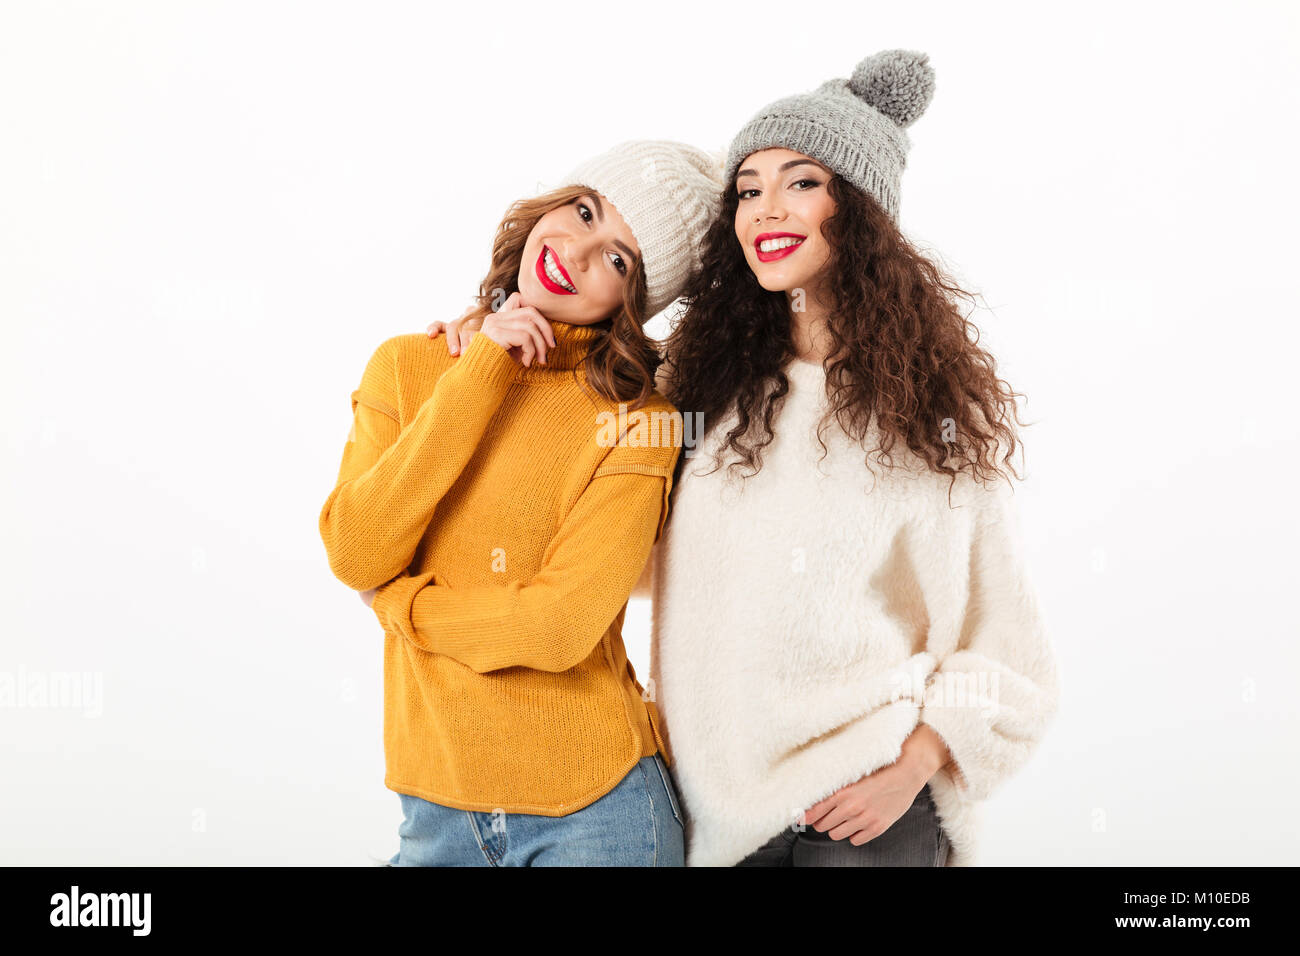 Two smiling girls in sweaters and hats posing together while looking at the camera over white background Stock Photo